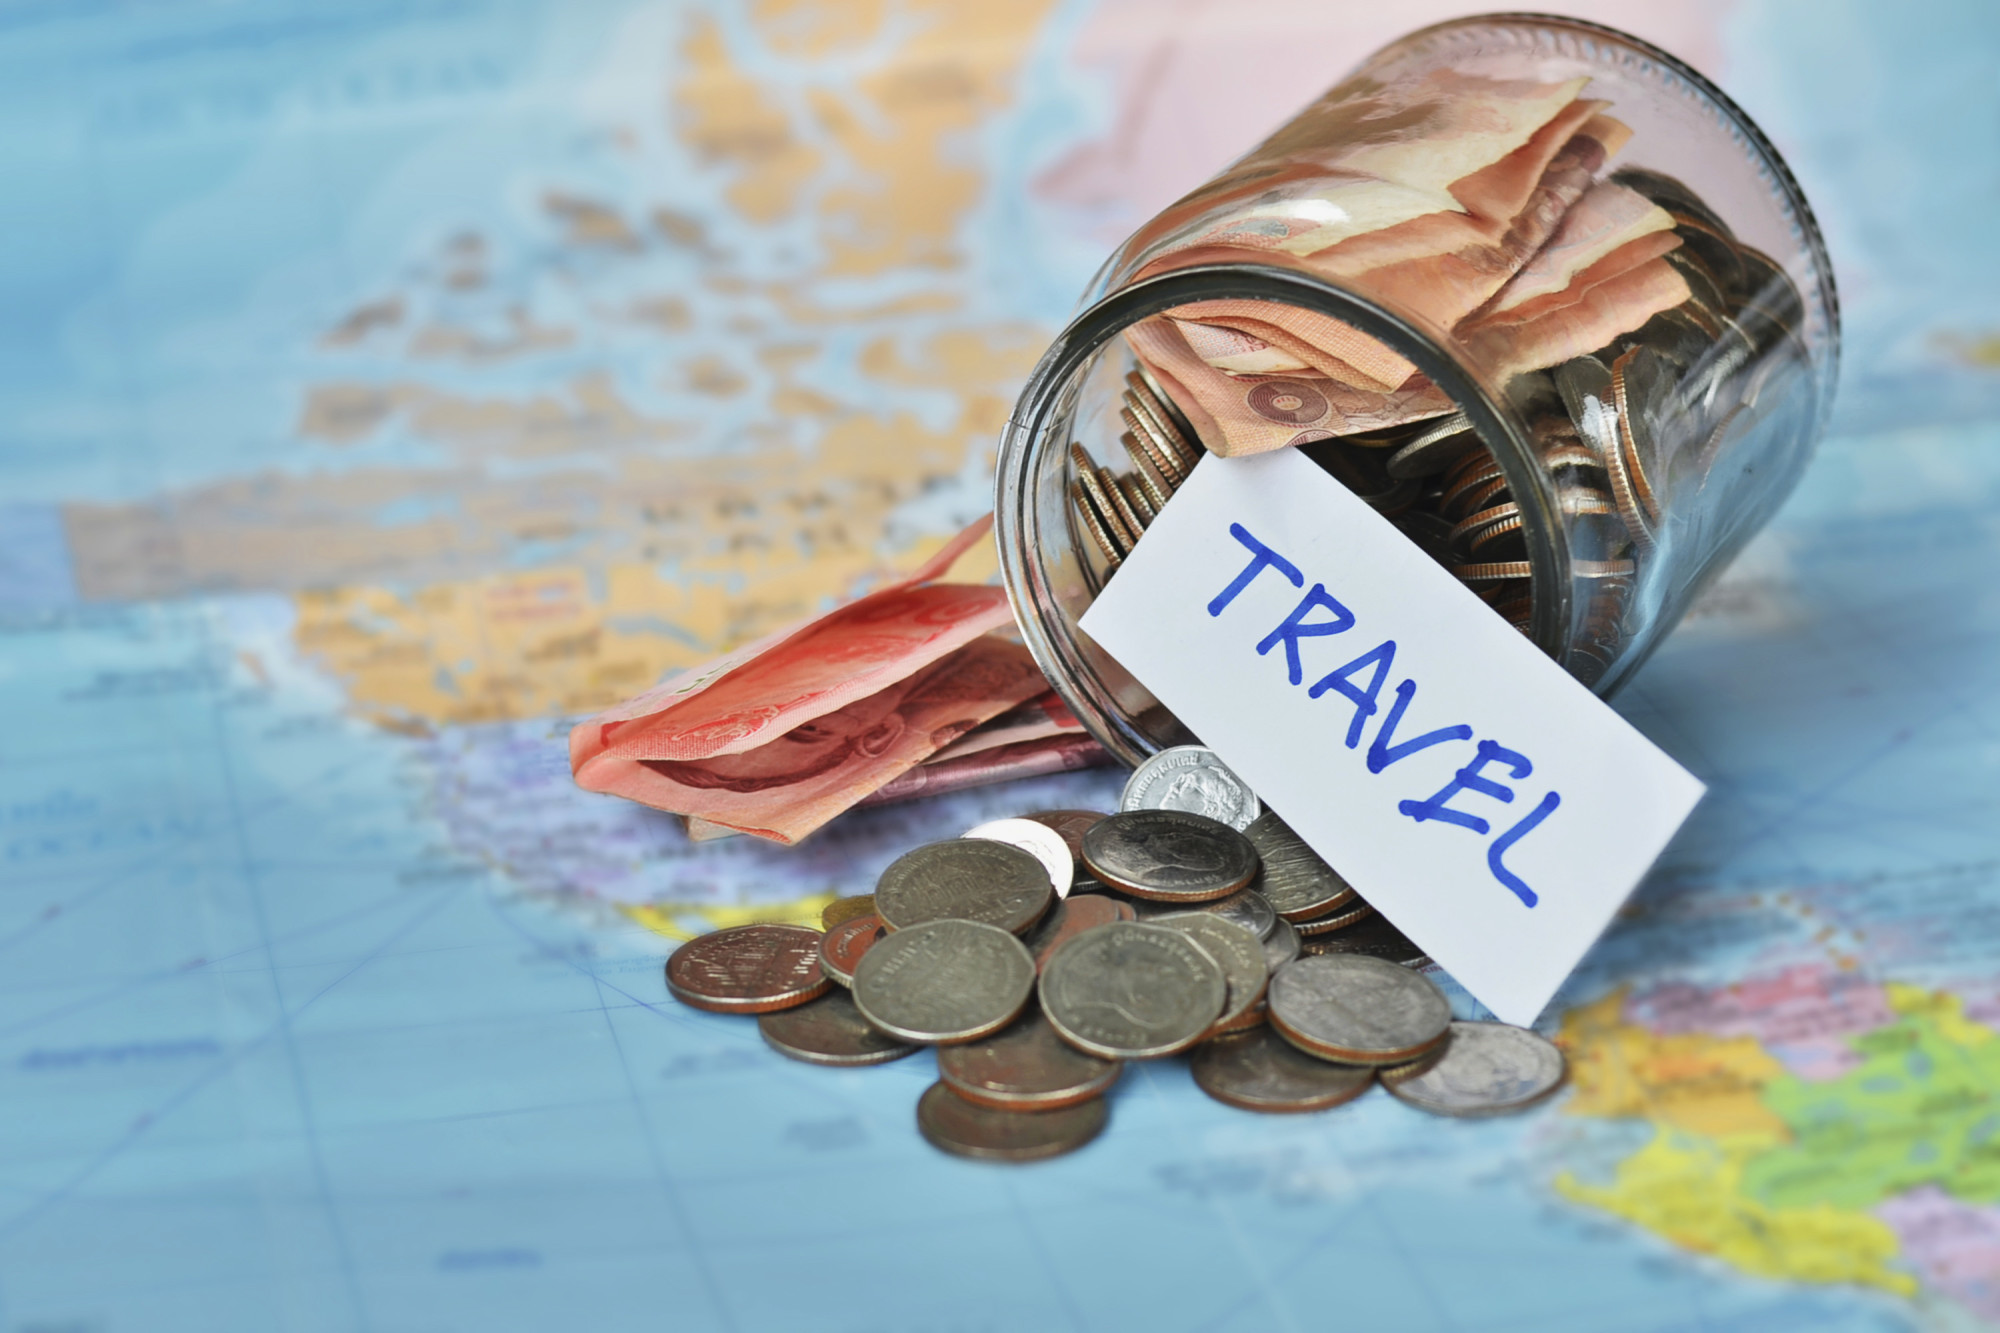 8 Tips on How to Get/Leverage a Travel Payment Plan (Even With Bad Credit)